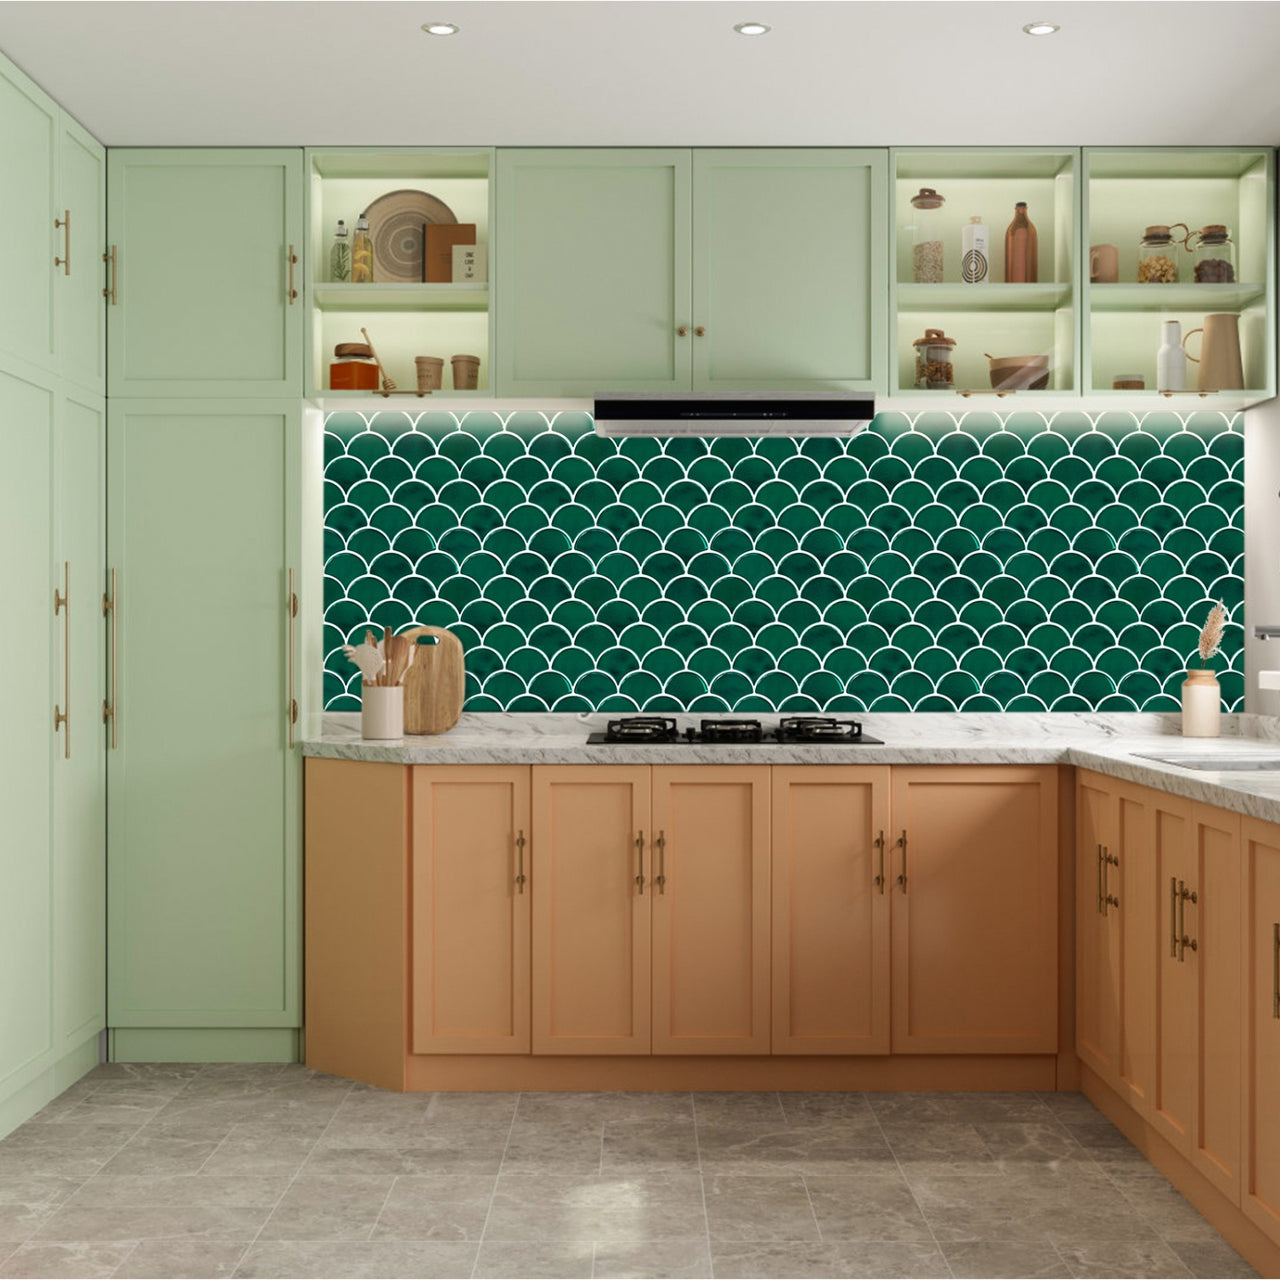 Green oriental fan self-adhesive kitchen tiles with white grout